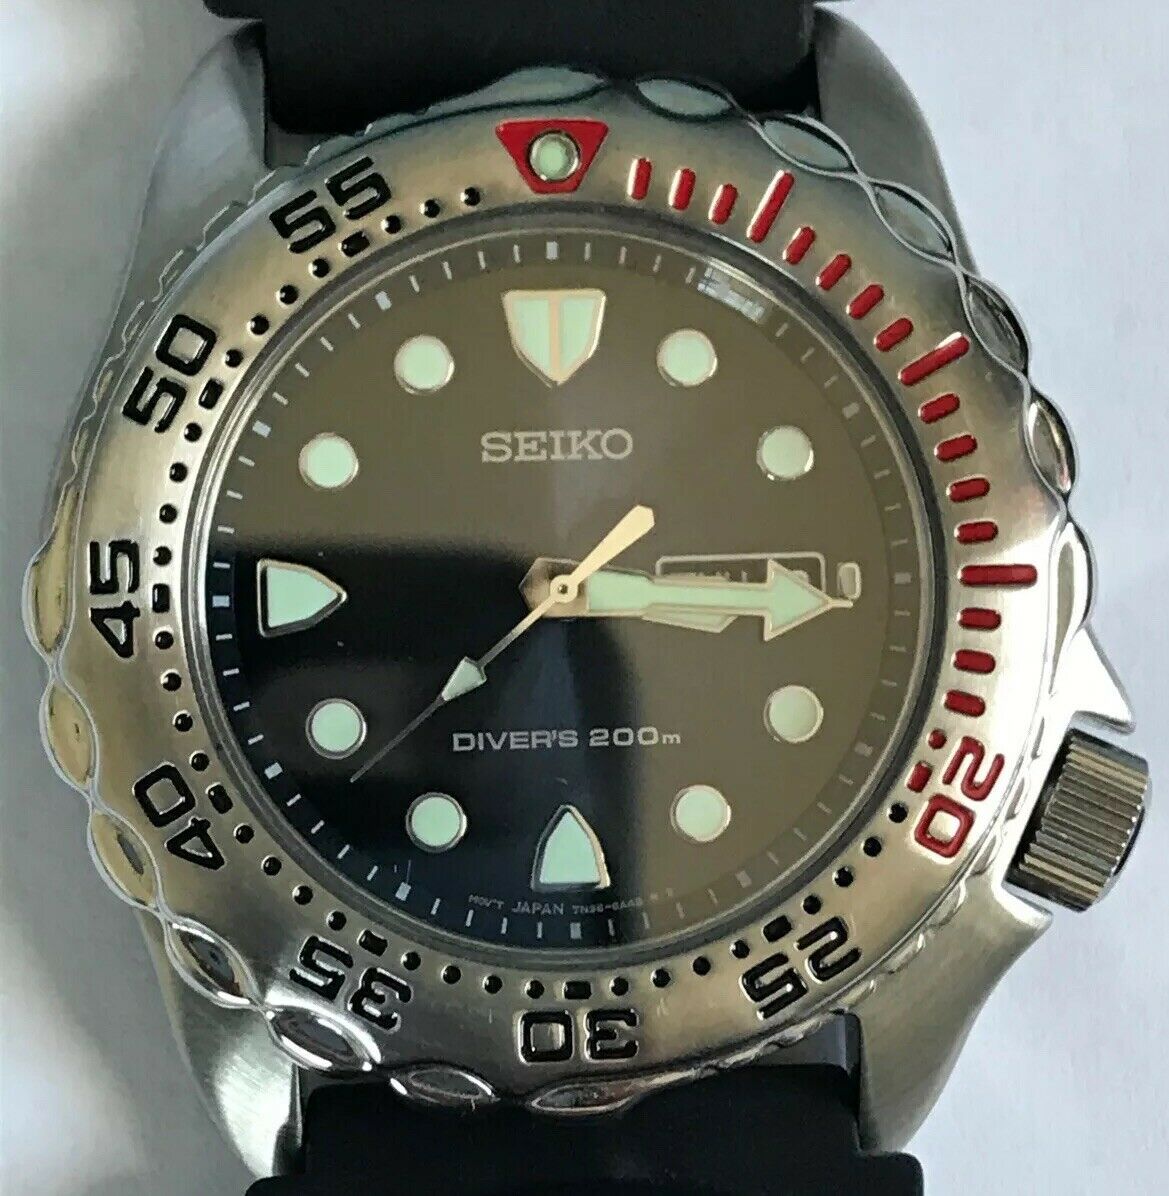 Reworking the Seiko Diver's Reference - PLEASE HELP... | Page 3 | The Watch  Site